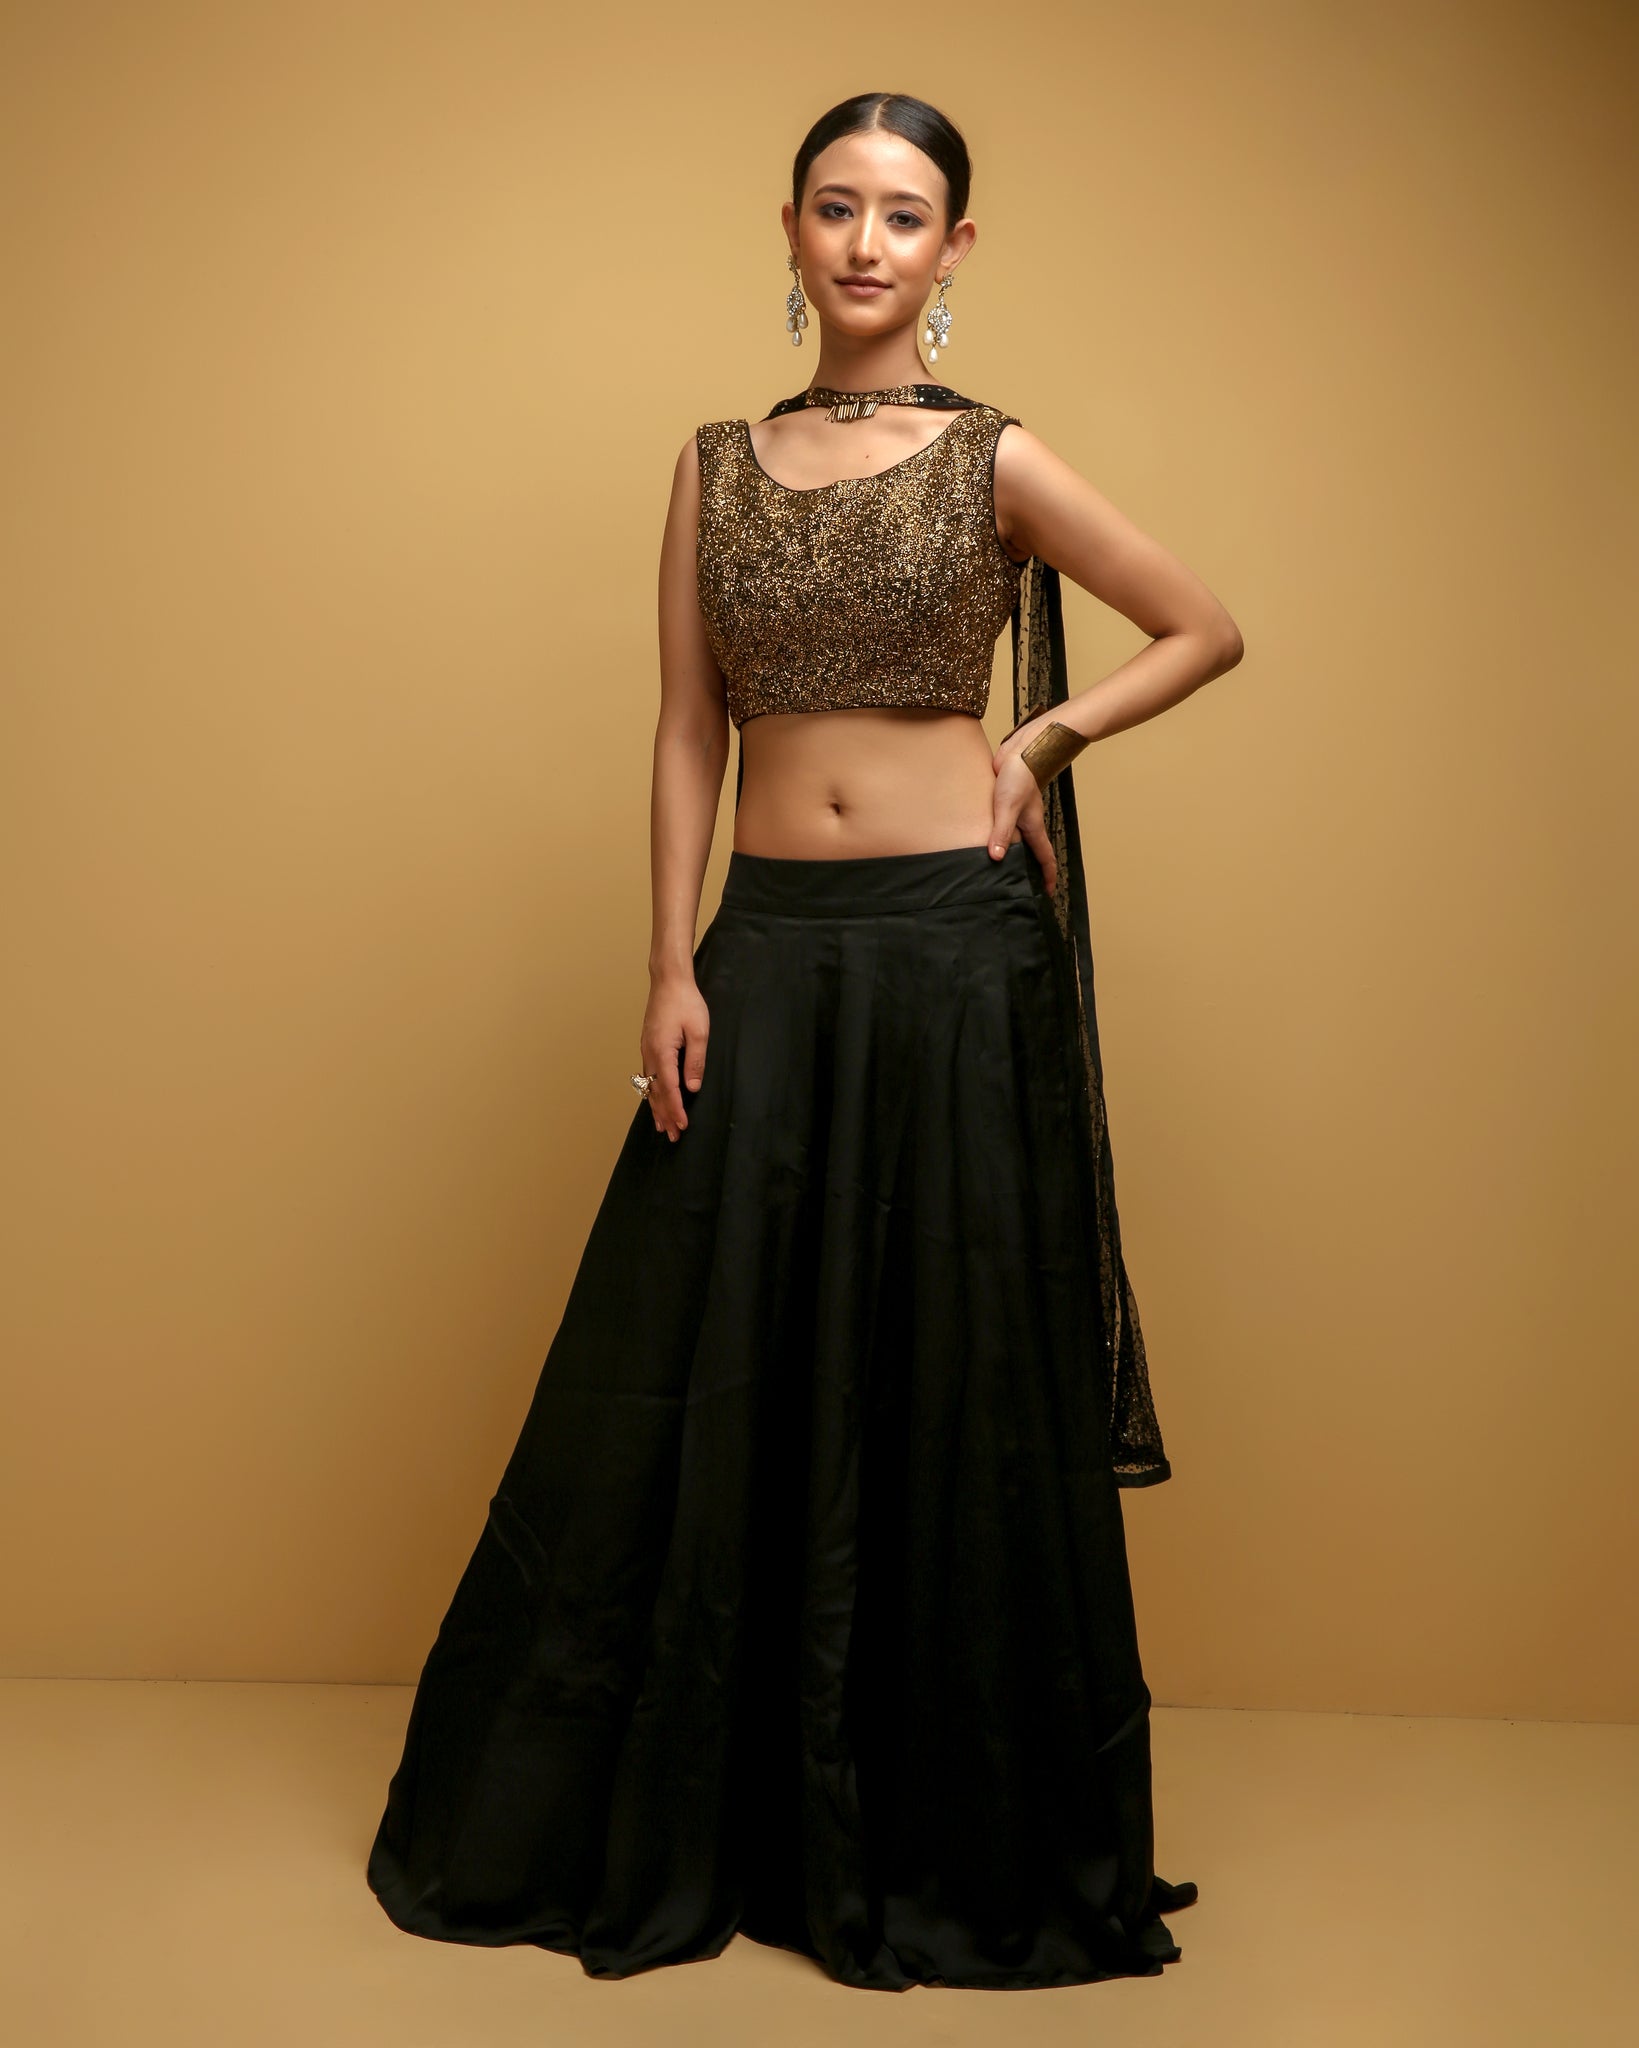 Priva Collective - PV 4304 : Black and Black lehenga - SOLD Get party ready  this season in this Black crop top skirt. Black embroidered waist belt.  with black net skirt Blouse :